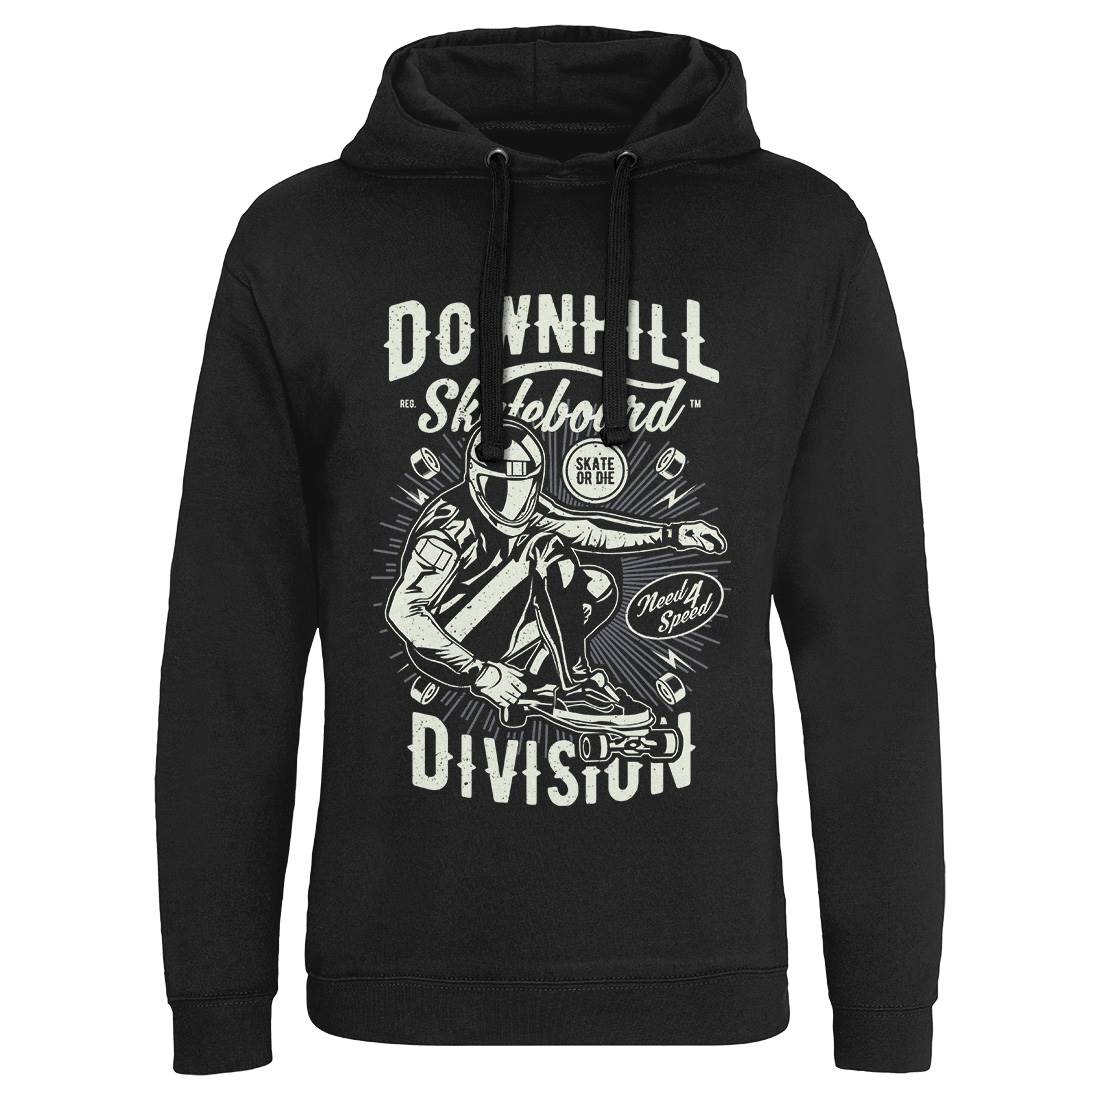 Downhill Skateboard Mens Hoodie Without Pocket Skate A645